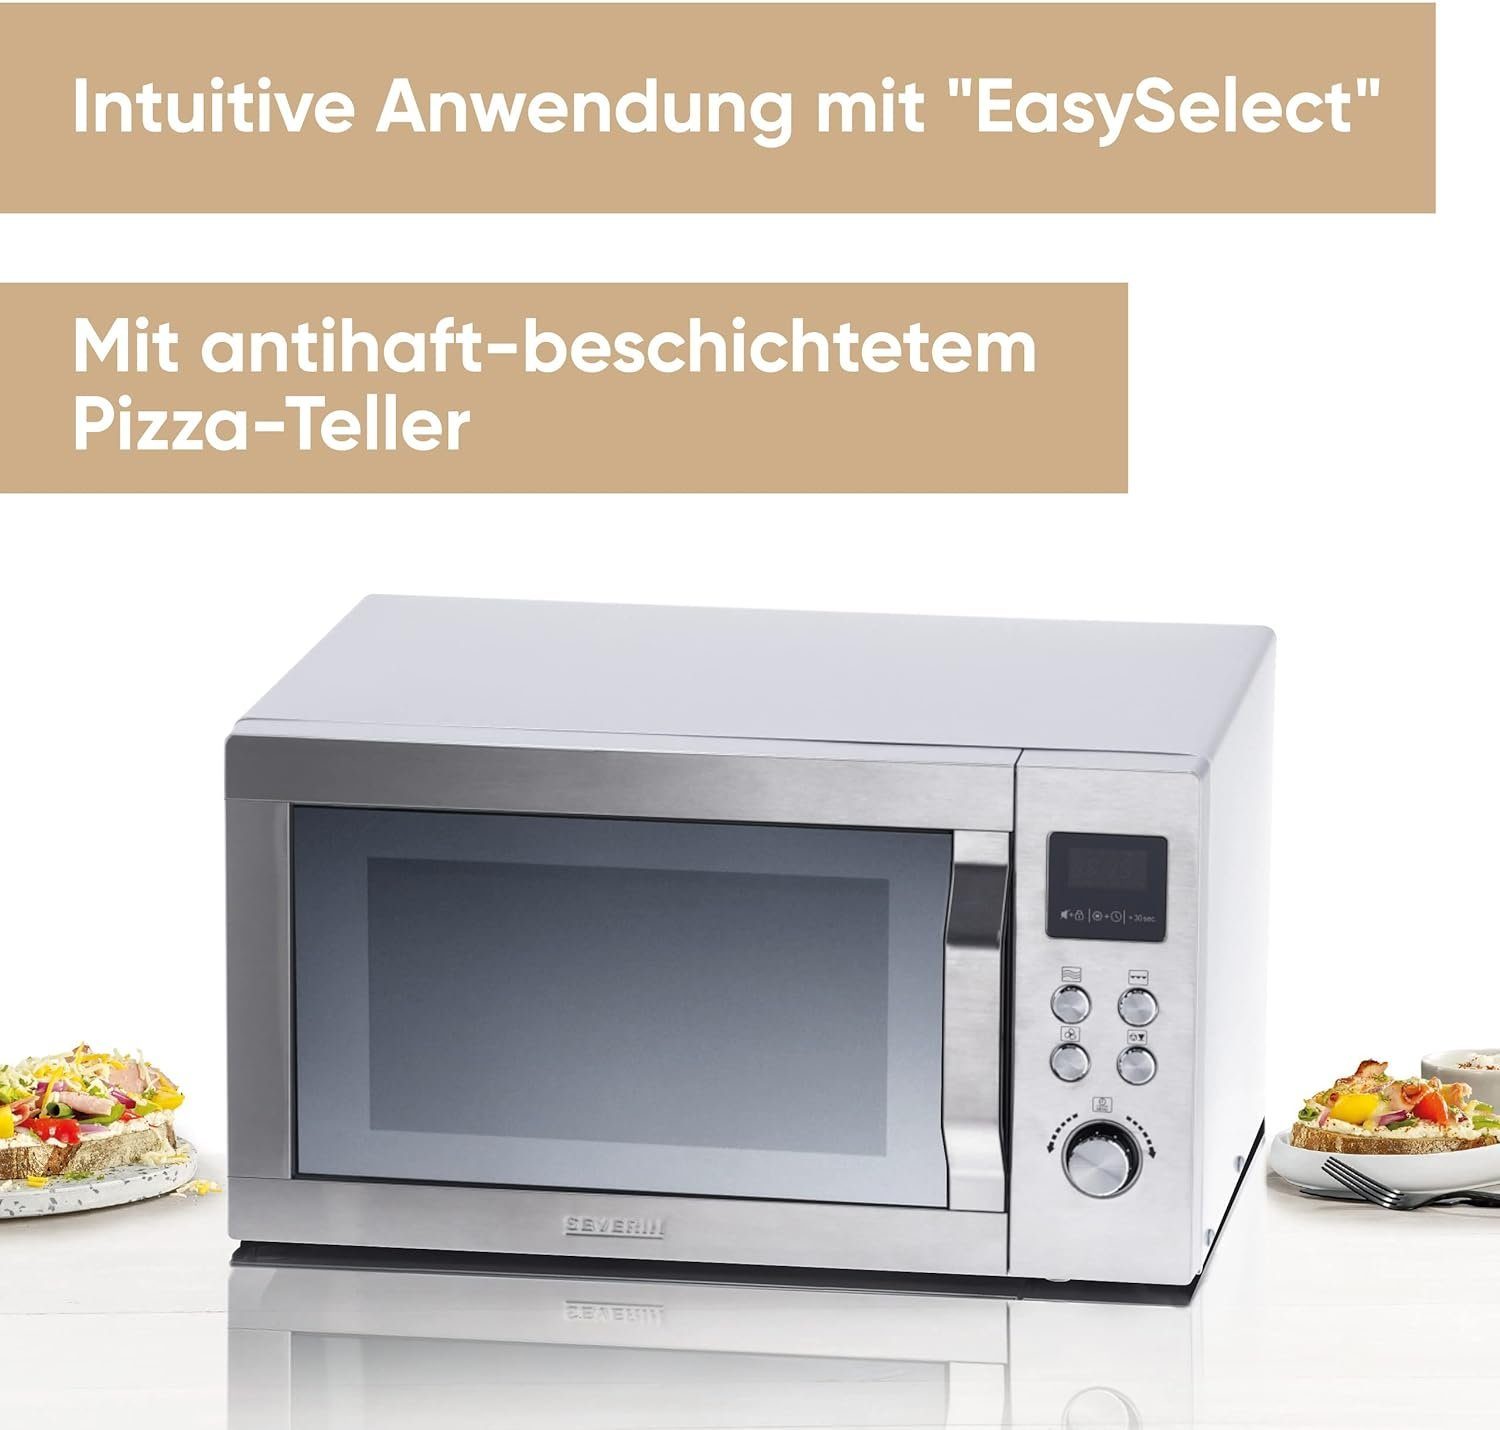 Grill Grill, Pizzafunktion Mikrowelle 25,00 L 3in1, Heißluft, mit l 25 Heißluftfunktion Mikrowelle Severin Display Mikrowelle,